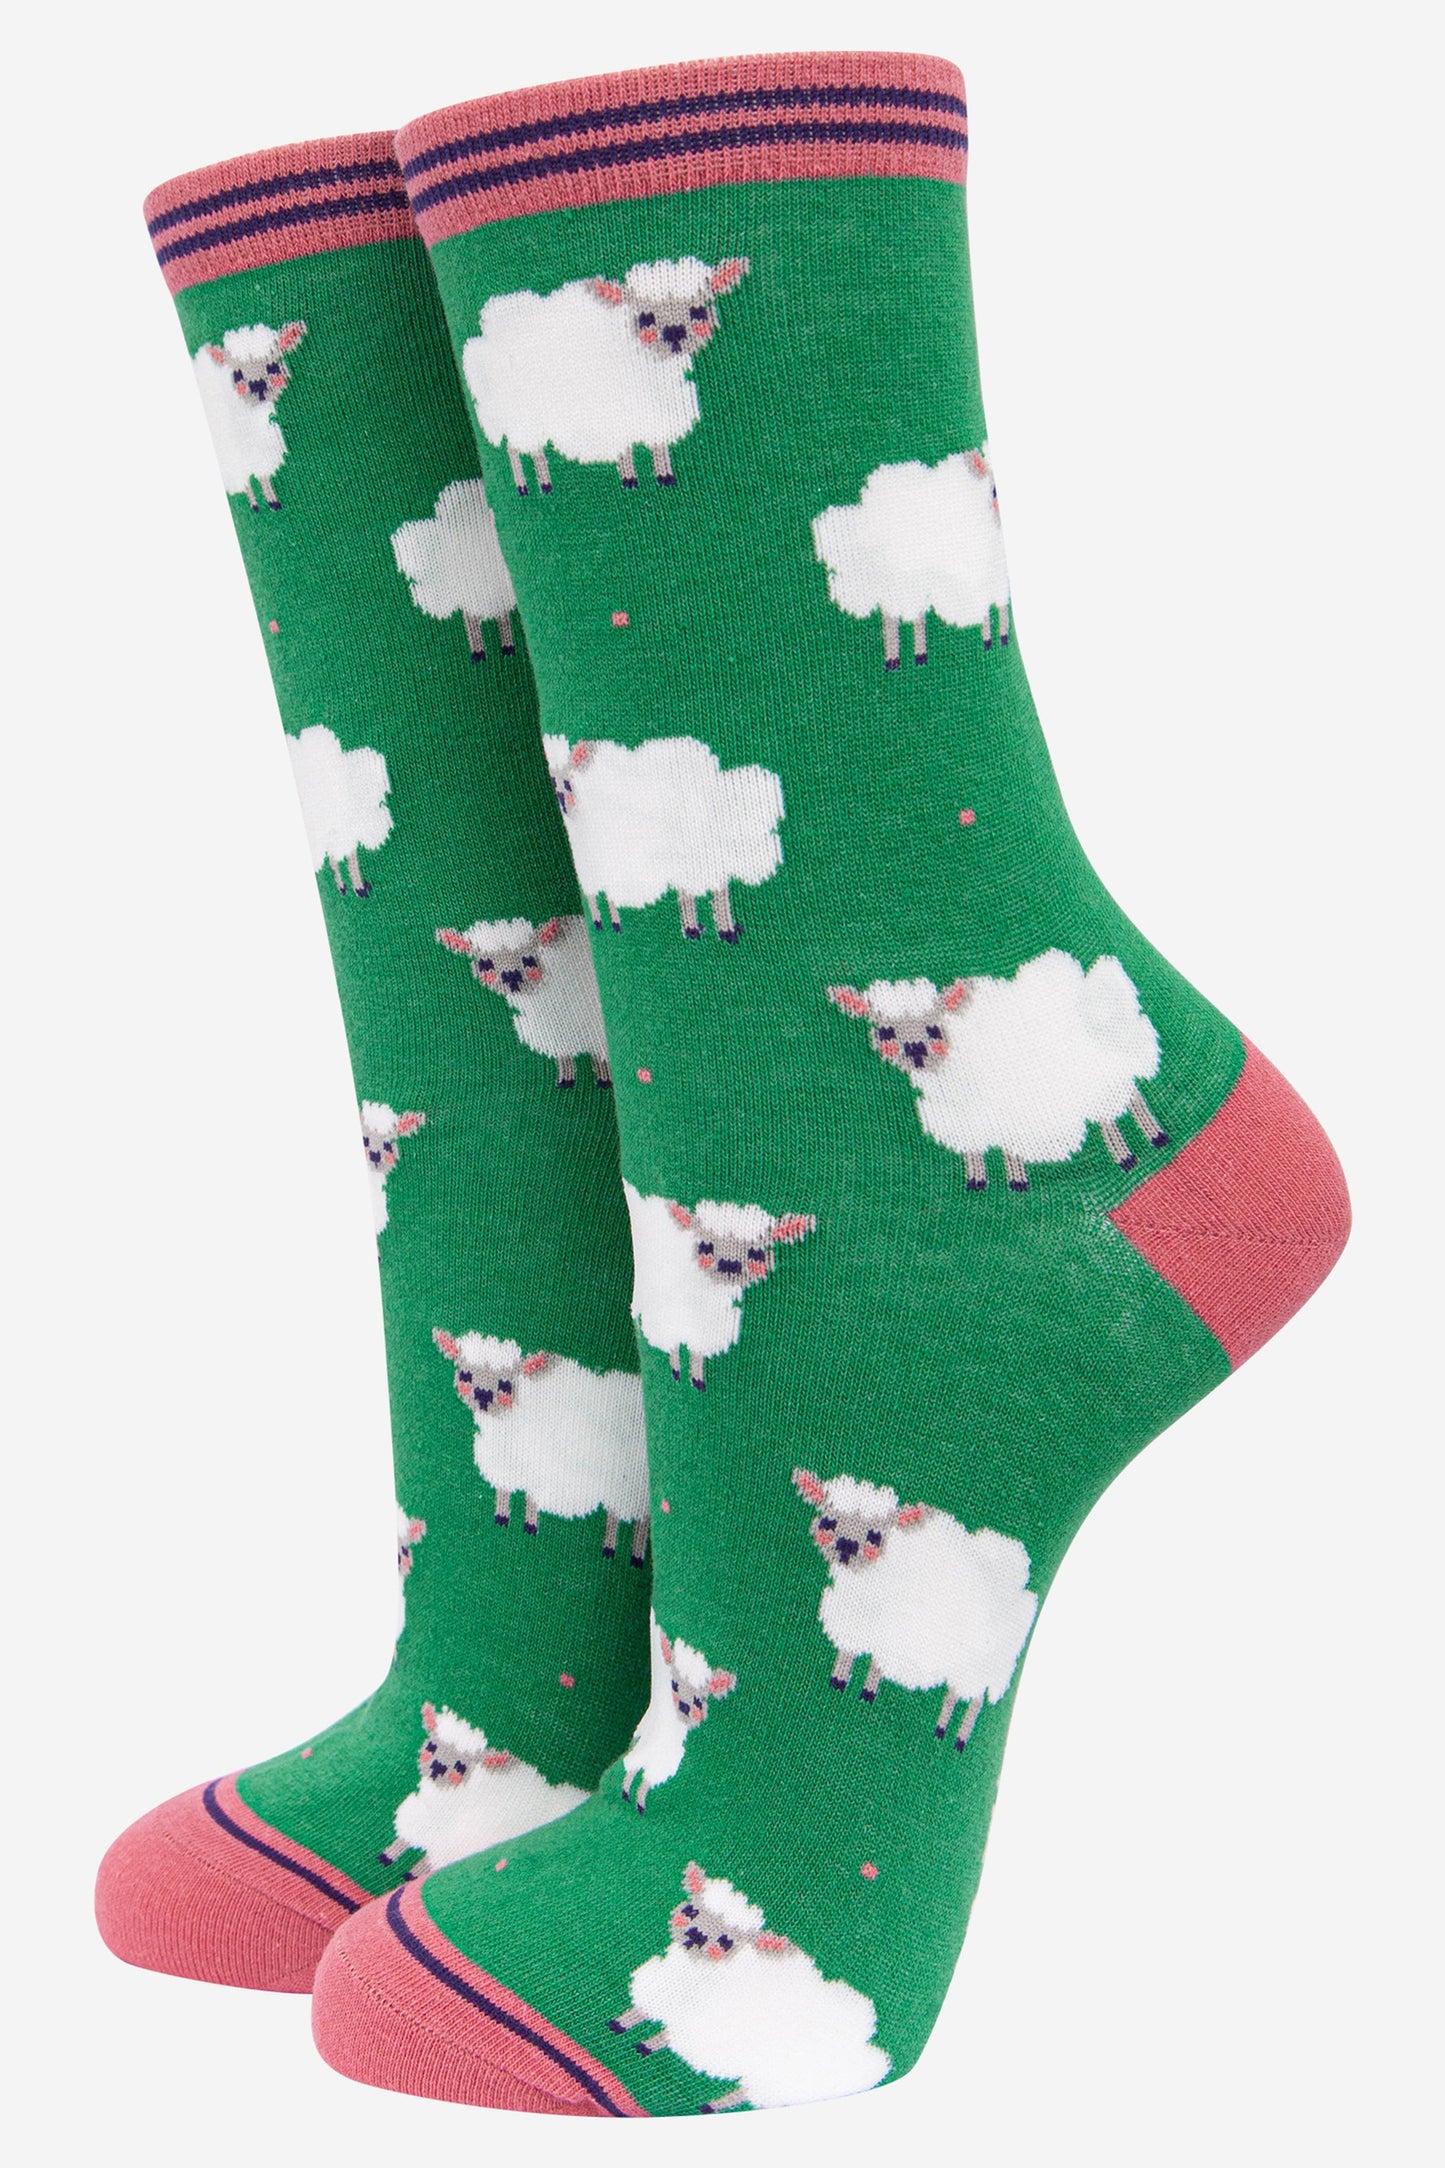 green ankle socks featuring a pattern of white woolly sheep lamb all over